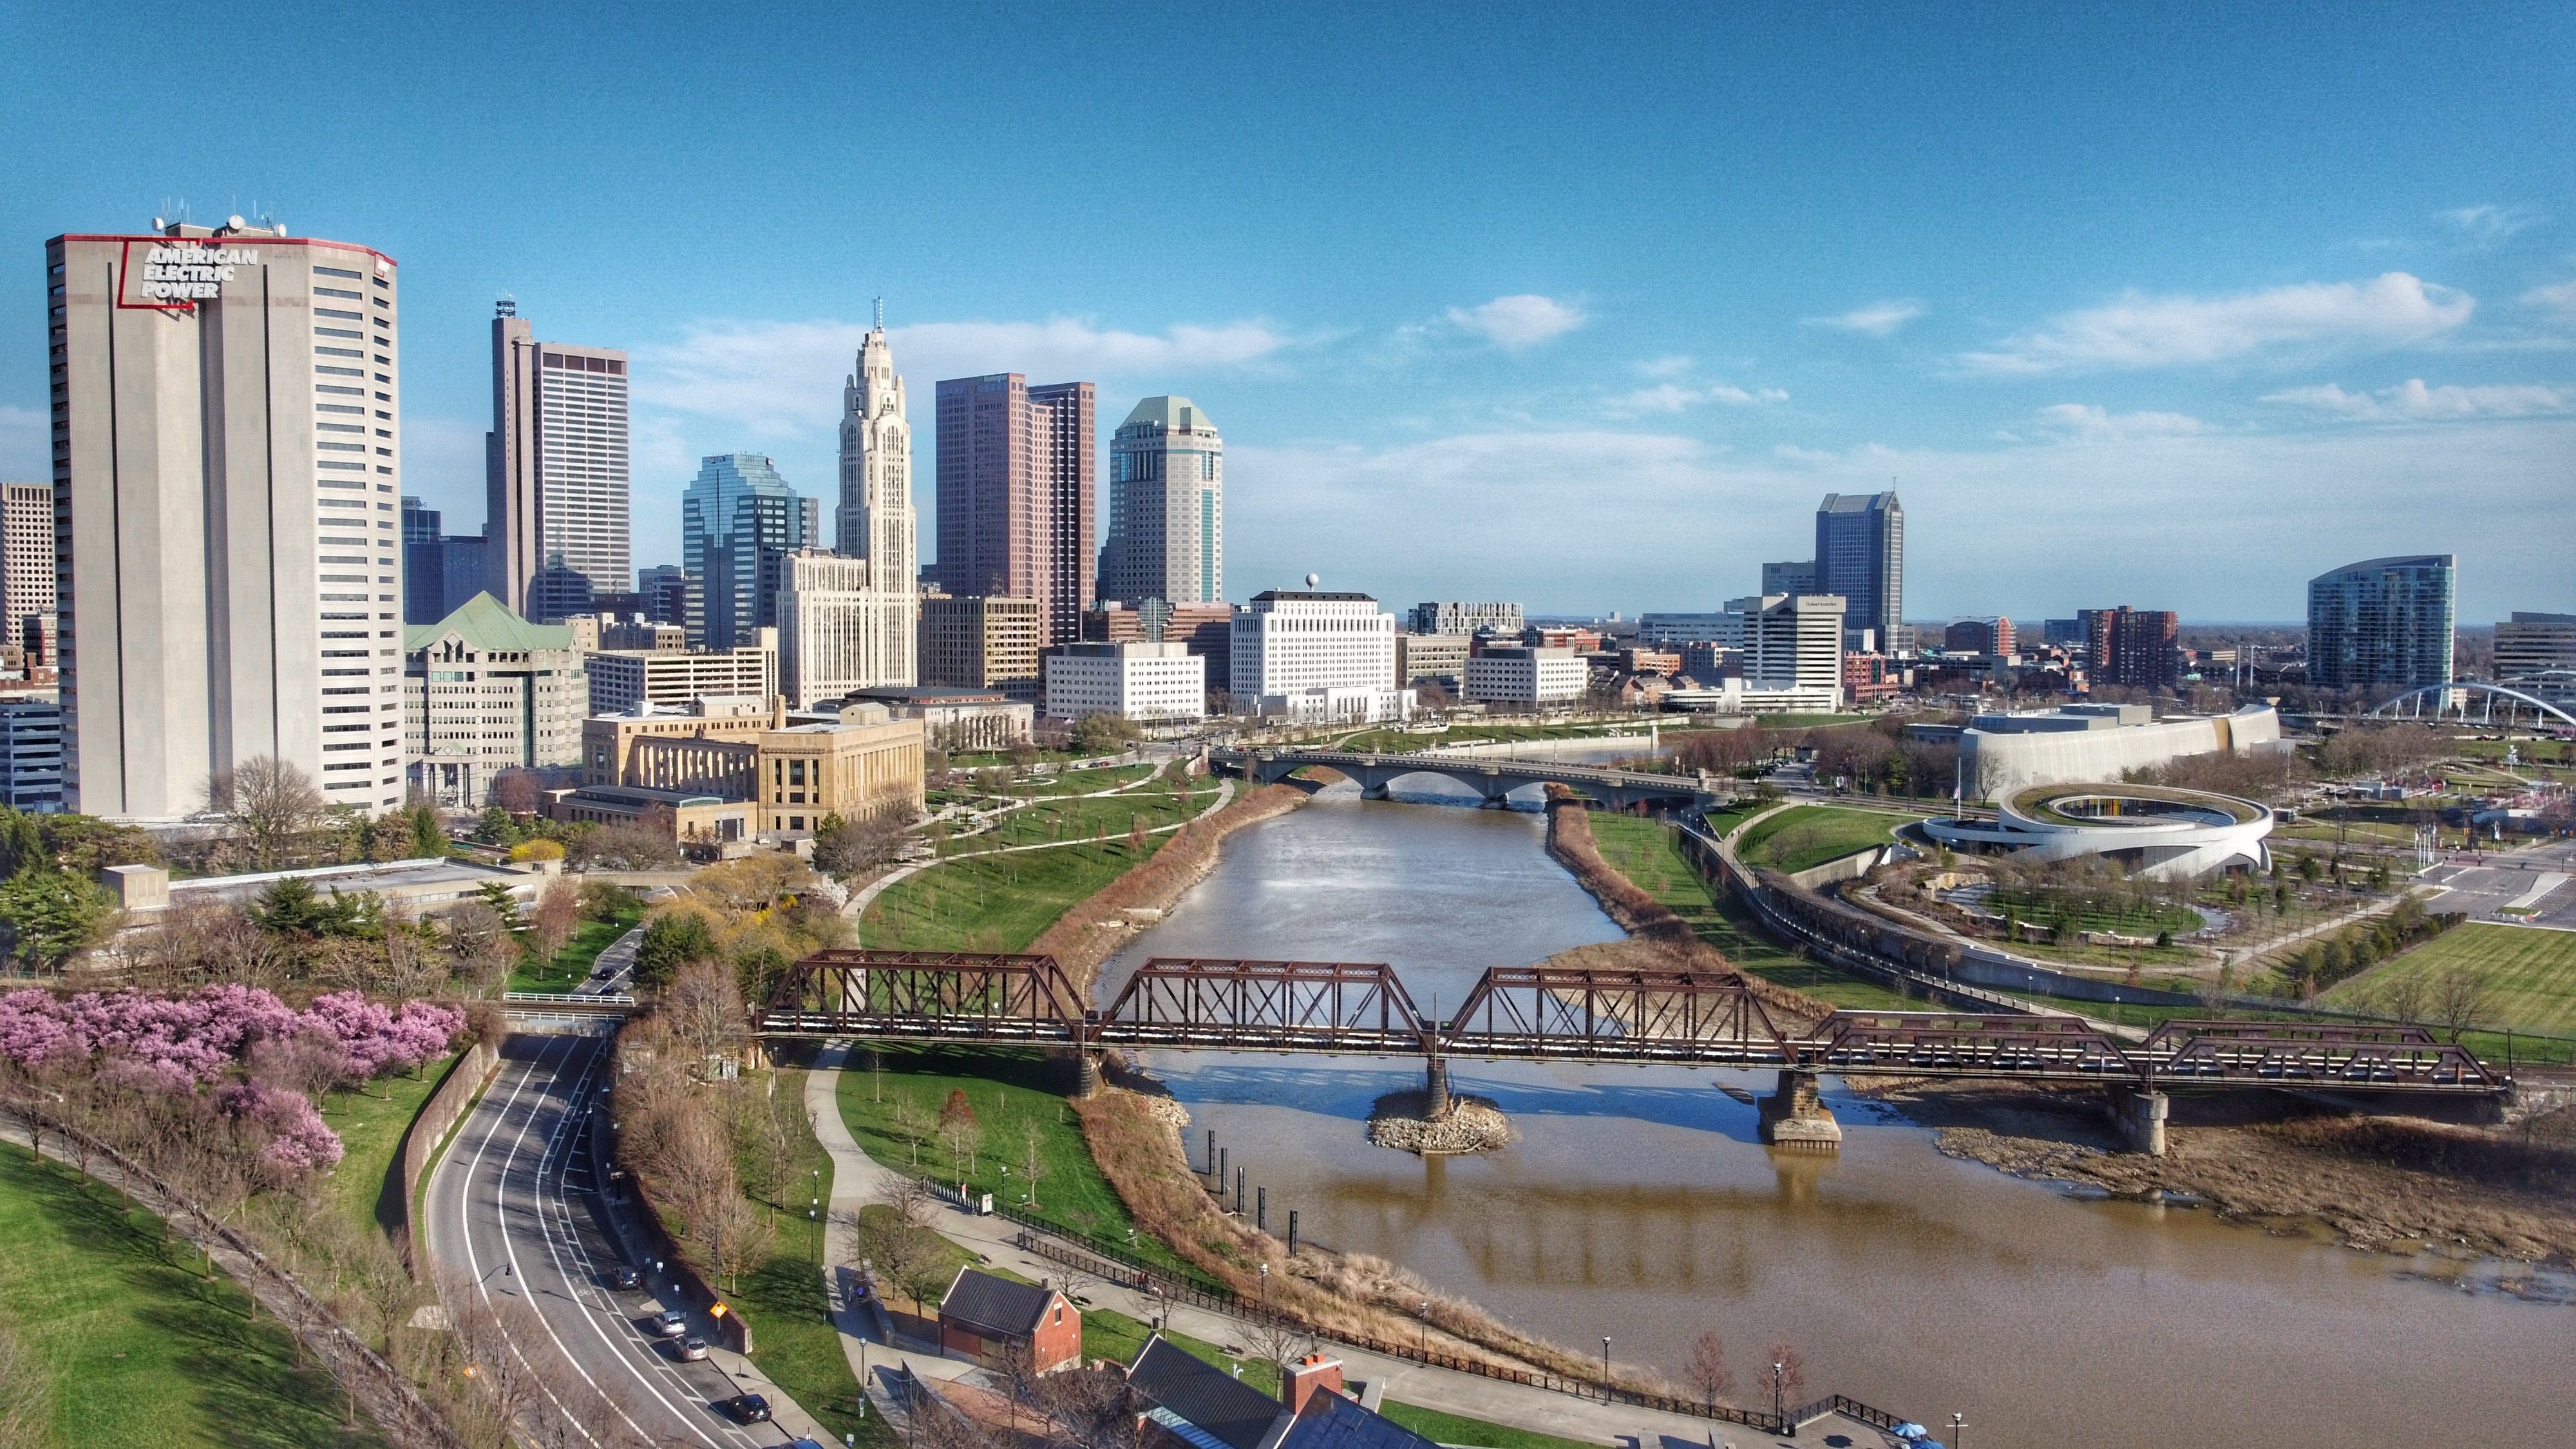 Columbus ( kə-LUM-bəs) is the capital and most populous city of the U.S. state of Ohio. With a 2020 census population of 905,748, it is the 14th-most populous city in the U.S., the second-most populous city in the Midwest after Chicago, and the third-most populous U.S. state capital after Phoenix, Arizona and Austin, Texas. Columbus is the county seat of Franklin County; it also extends into Delaware and Fairfield counties. It is the core city of the Columbus metropolitan area, which encompasses ten counties in central Ohio. It had a population of 2,138,926 in 2020, making it the largest metropolitan area entirely in Ohio and 32nd-largest metro area in the U.S.
Columbus originated as numerous Native American settlements on the banks of the Scioto River. Franklinton, now a city neighborhood, was the first European settlement, laid out in 1797. The city was founded in 1812 at the confluence of the Scioto and Olentangy rivers, and laid out to become the state capital. The city was named for Italian explorer Christopher Columbus. The city assumed the function of state capital in 1816 and county seat in 1824. Amid steady years of growth and industrialization, the city has experienced numerous floods and recessions. Beginning in the 1950s, Columbus began to experience significant growth; it became the largest city in Ohio in land and population by the early 1990s. Growth has continued in the 21st century, with redevelopment occurring in numerous city neighborhoods, including Downtown.
The city has a diverse economy based on education, government, insurance, banking, defense, aviation, food, clothes, logistics, steel, energy, medical research, health care, hospitality, retail and technology. The metropolitan area is home to the Battelle Memorial Institute, the world's largest private research and development foundation; Chemical Abstracts Service, the world's largest clearinghouse of chemical information; and the Ohio State University, one of the largest universities in the United States. The Greater Columbus area is further home to the headquarters of six Fortune 500 companies, namely Cardinal Health, American Electric Power, L Brands, Nationwide, Bread Financial and Huntington Bancshares.